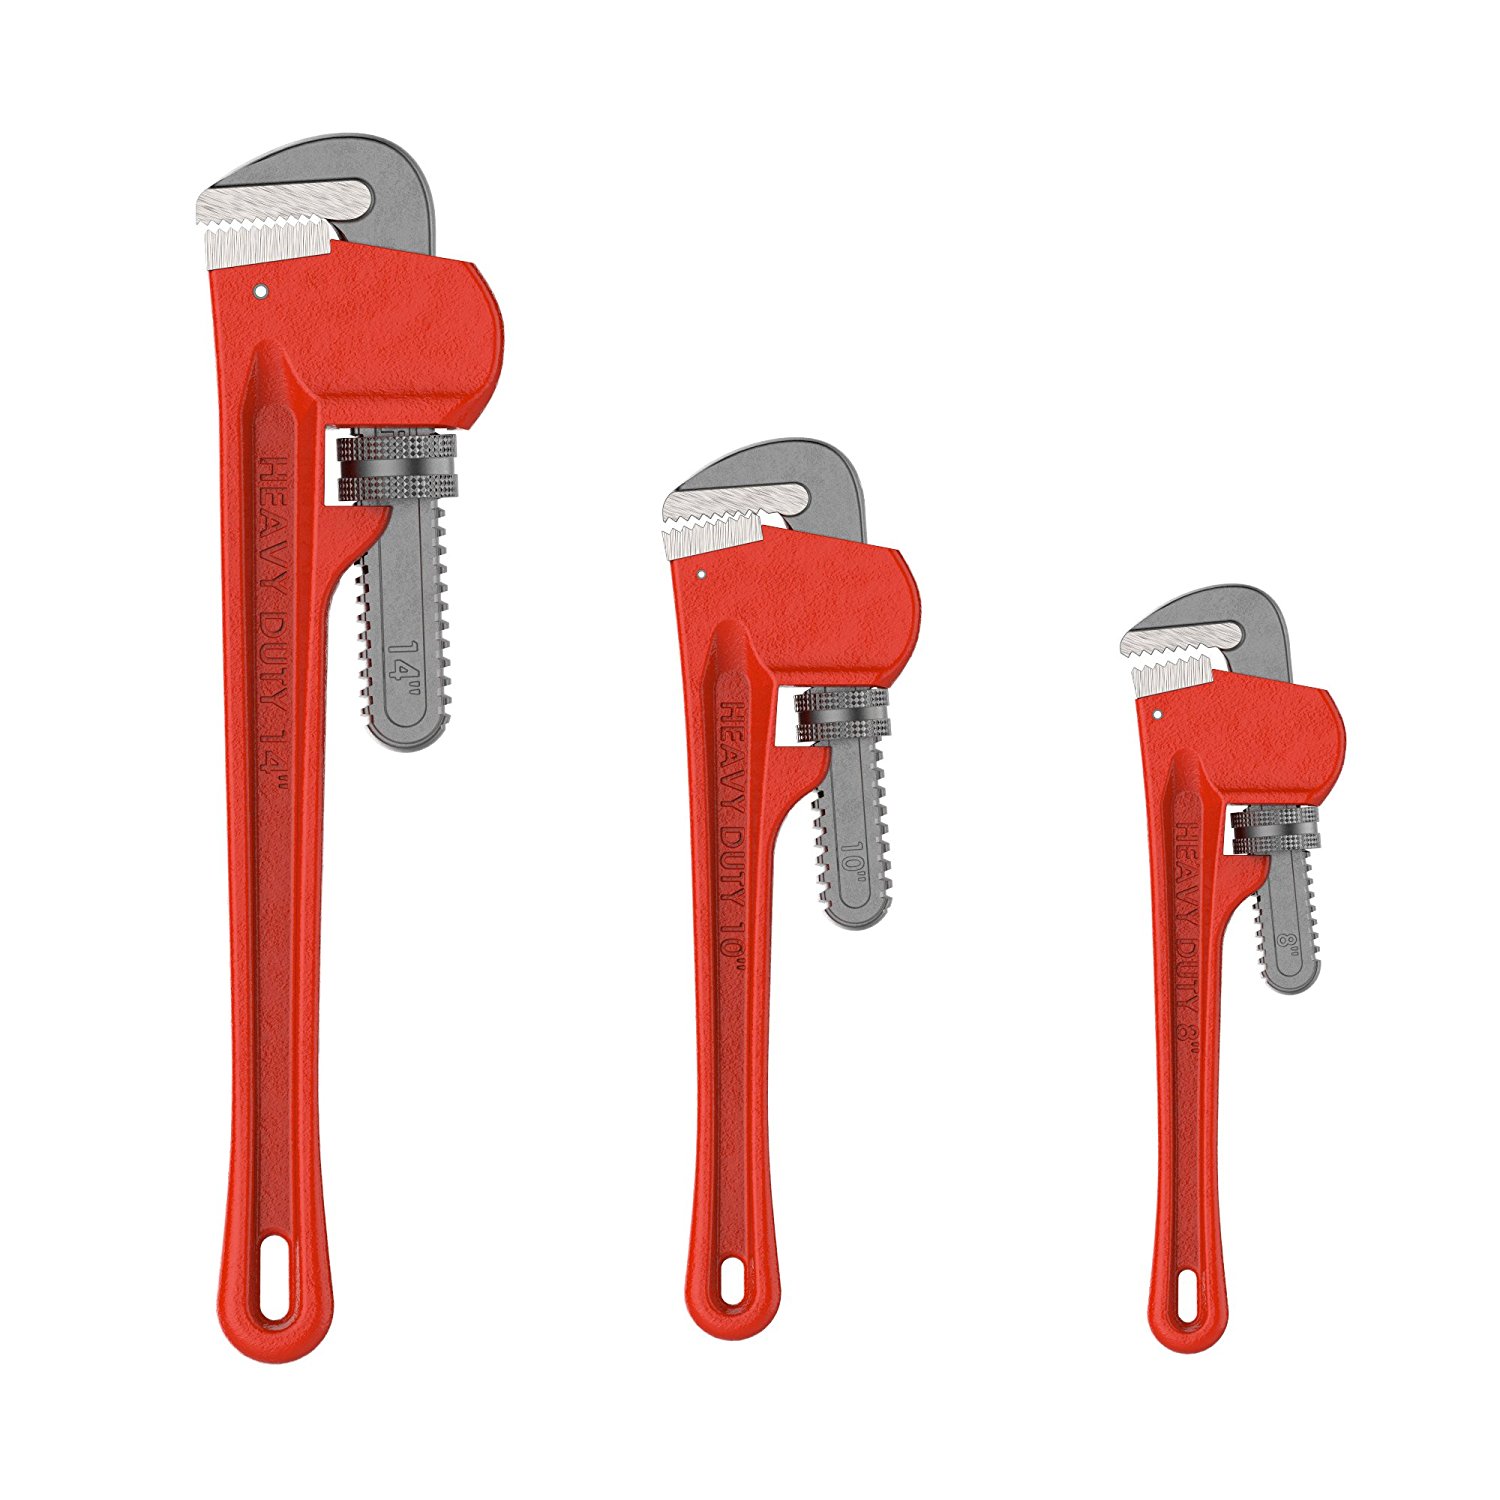 Plumbers Pipe Wrench, 3 Piece 14-Inch, 10-Inch, 8-Inch Set - Home ...